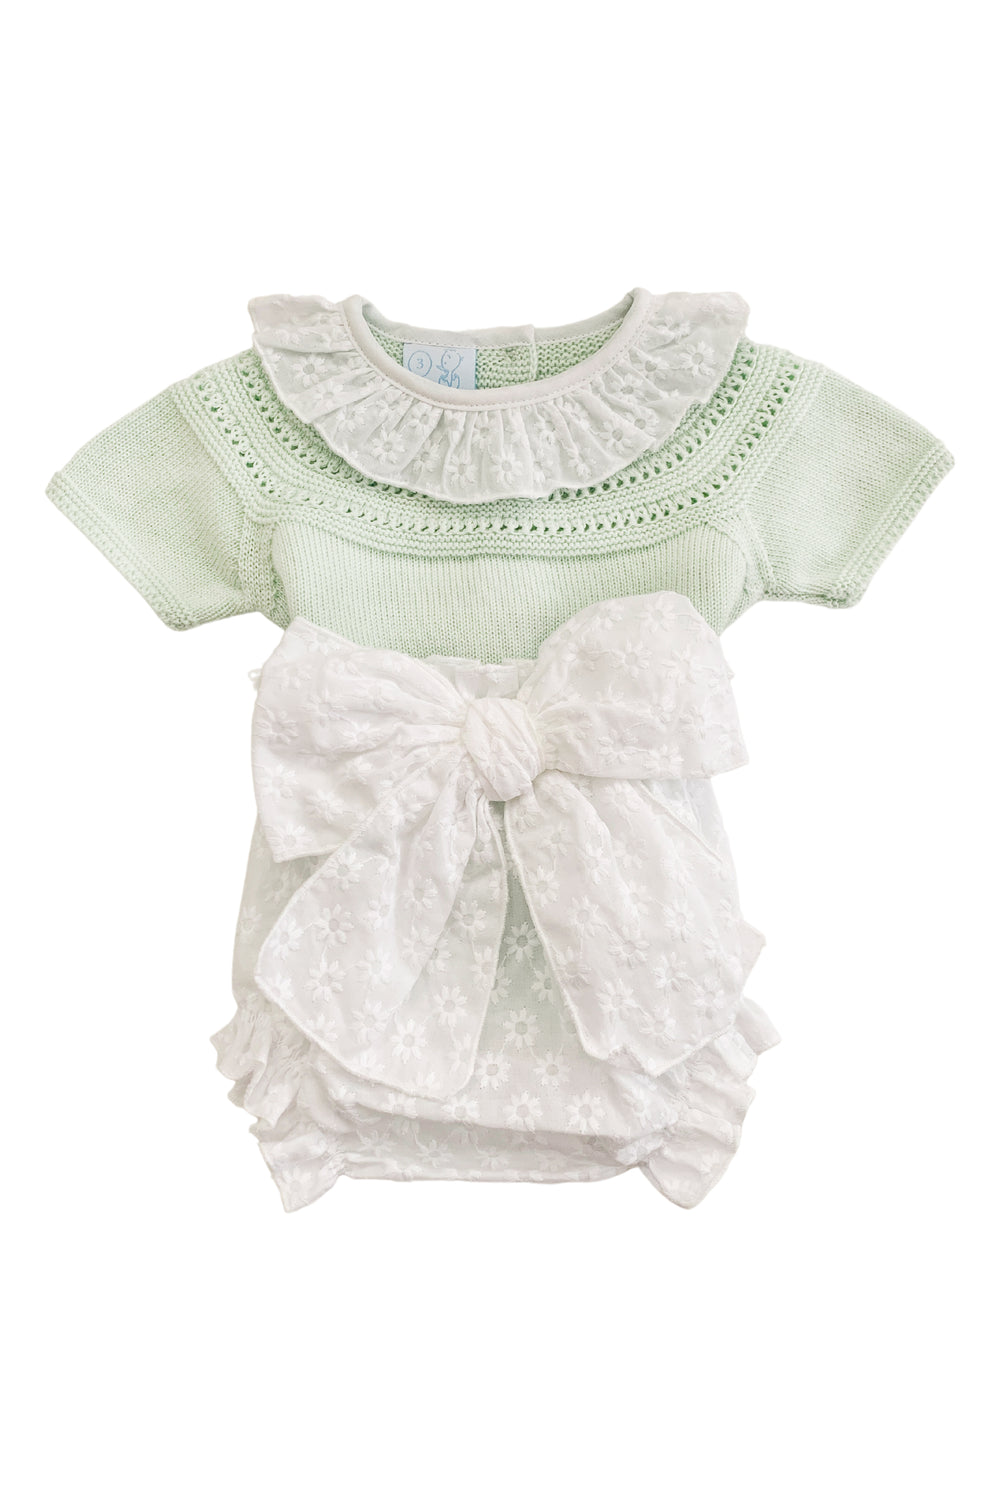 Granlei "Indie" Pastel Green Knit Top & White Bow Bloomers | Millie and John